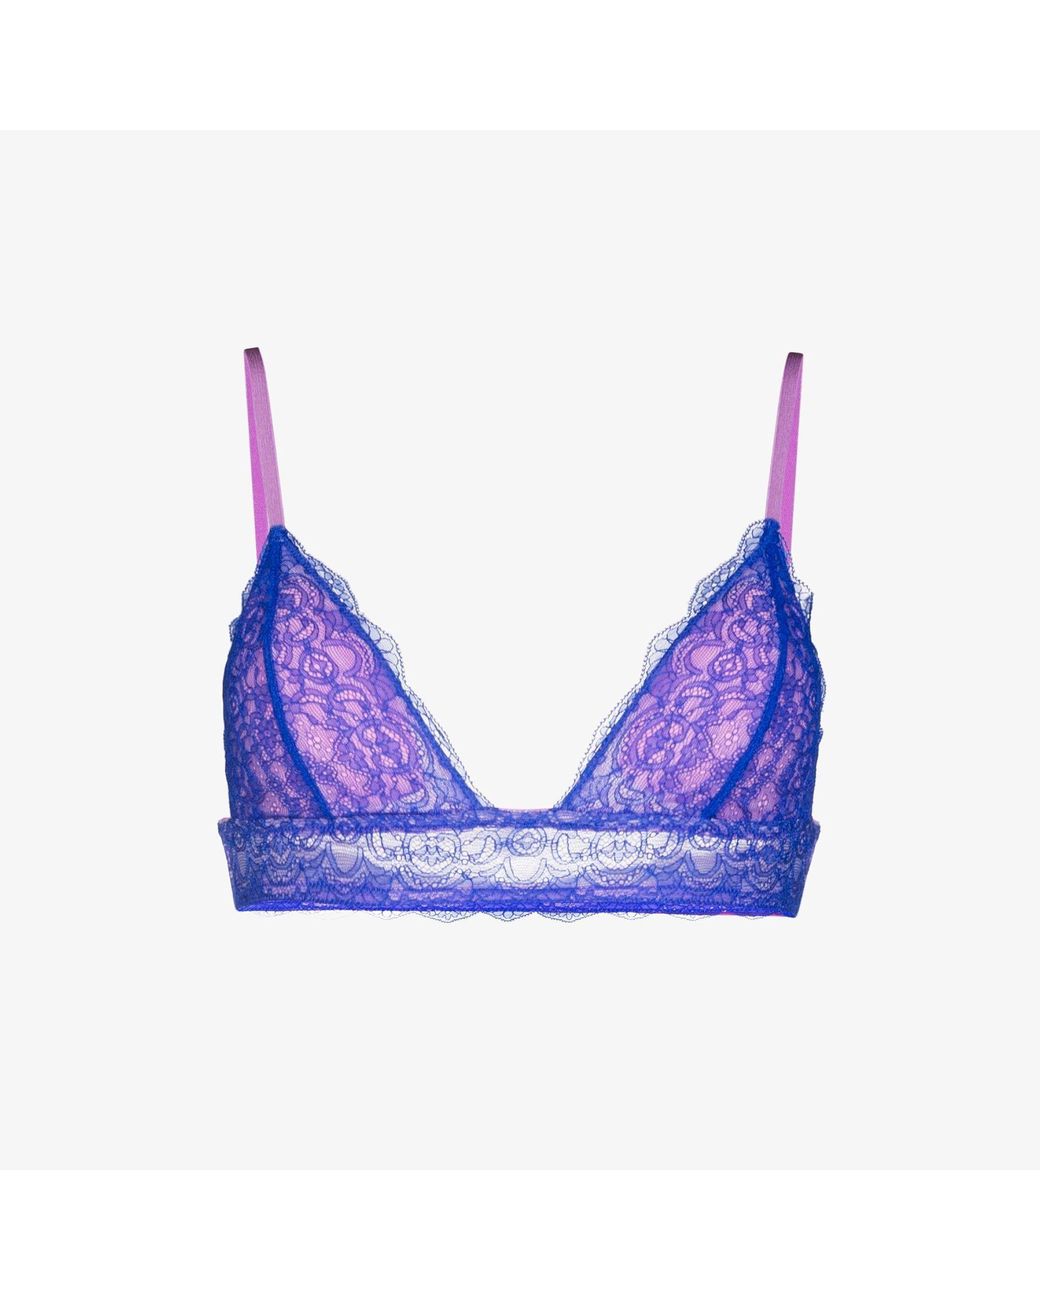 Dora Larsen Cameron Lace Soft-cup Triangle Bra in Purple Womens Clothing Lingerie Bras 